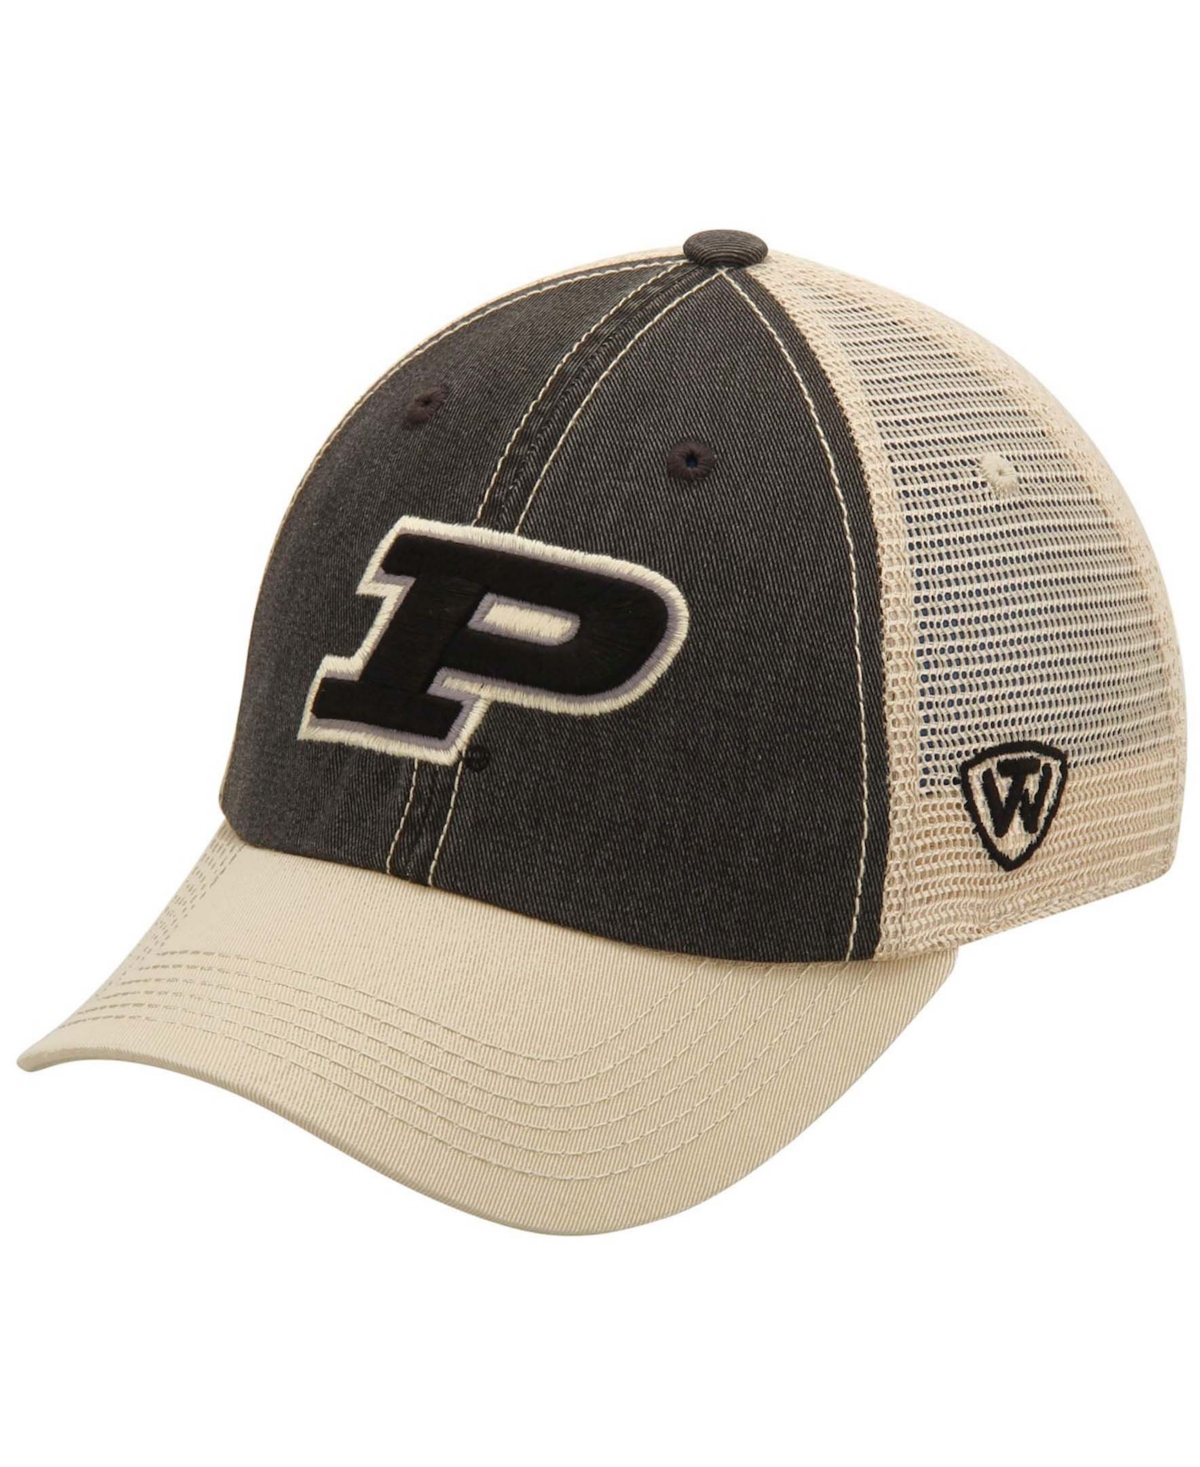 Top Of The World Men's Black And Tan Purdue Boilermakers Offroad Trucker Hat In Black,tan